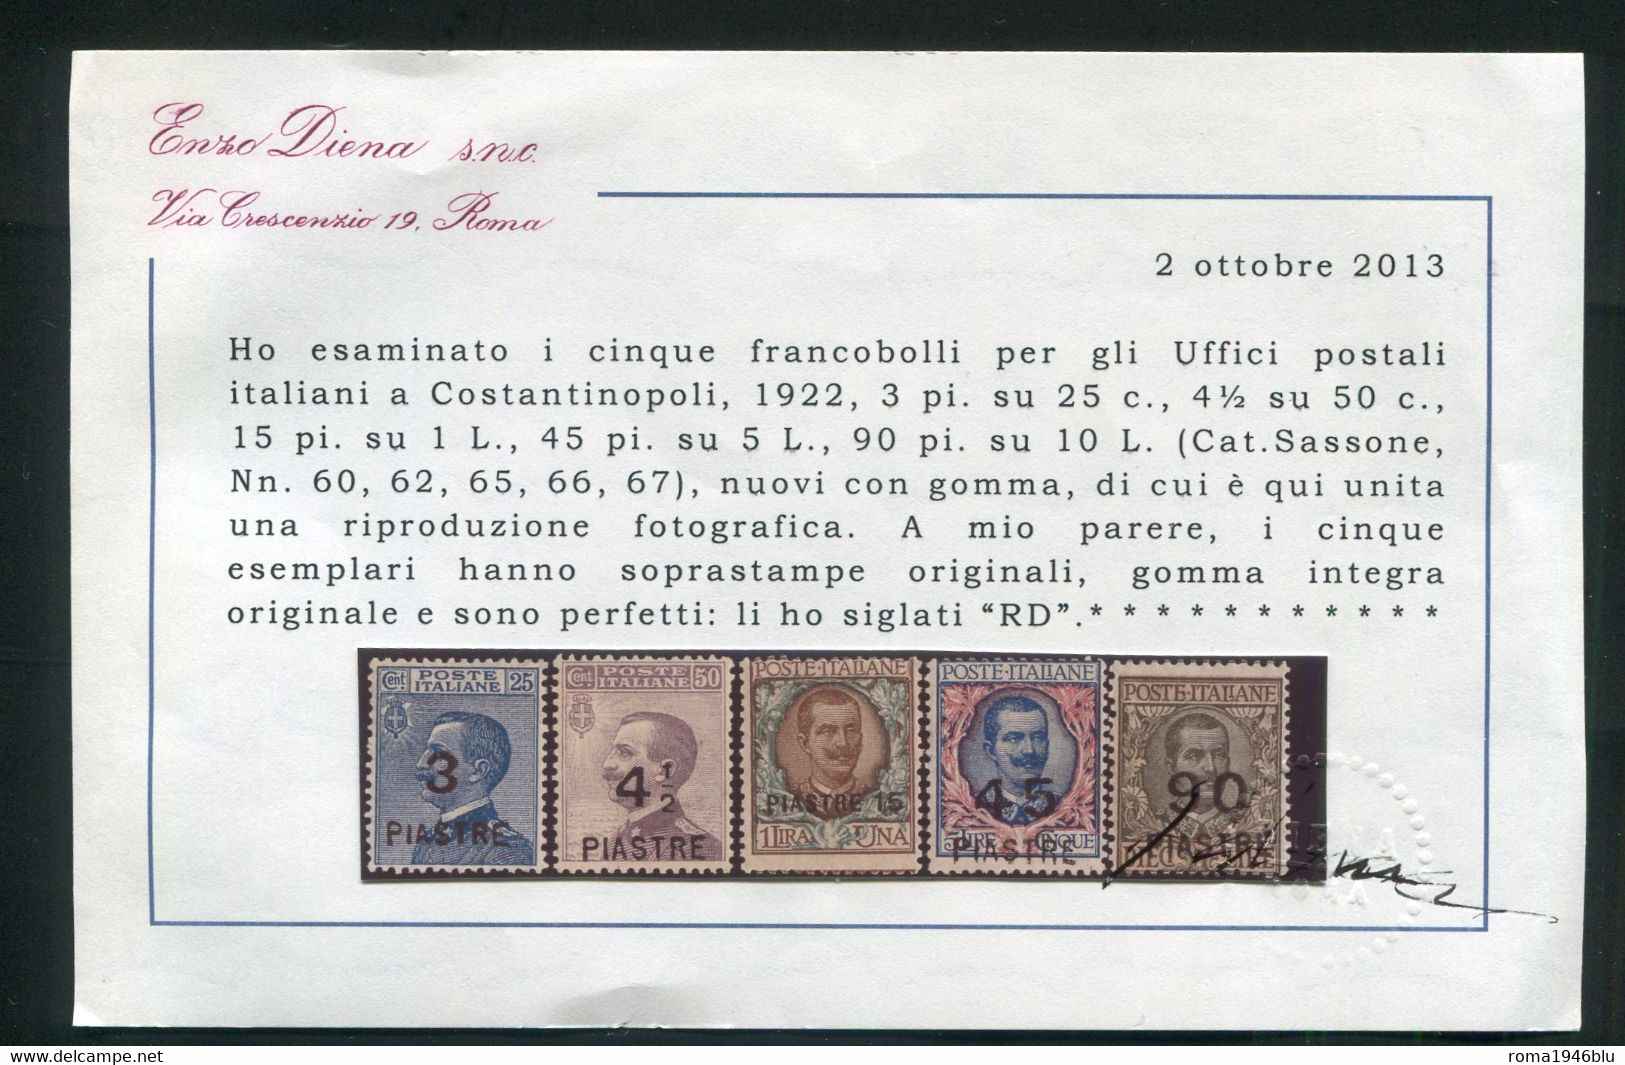 LEVANTE COSTANTINOPOLI 1922 8* EMISSIONE SERIE CPL. 58/67 ** MNH C. DIENA - European And Asian Offices